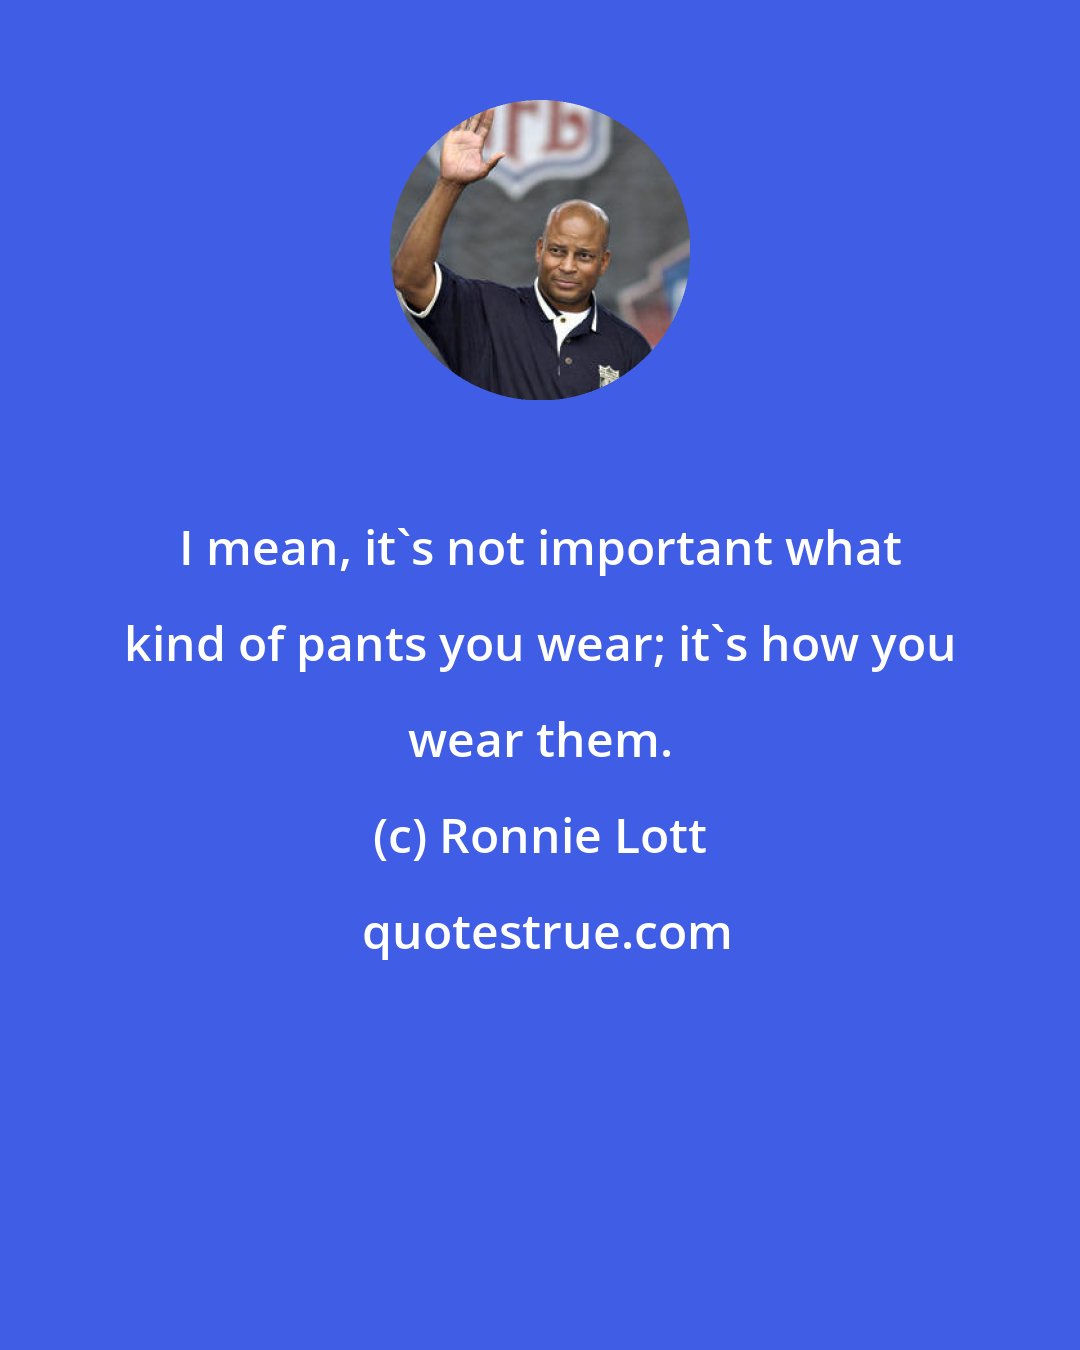 Ronnie Lott: I mean, it's not important what kind of pants you wear; it's how you wear them.